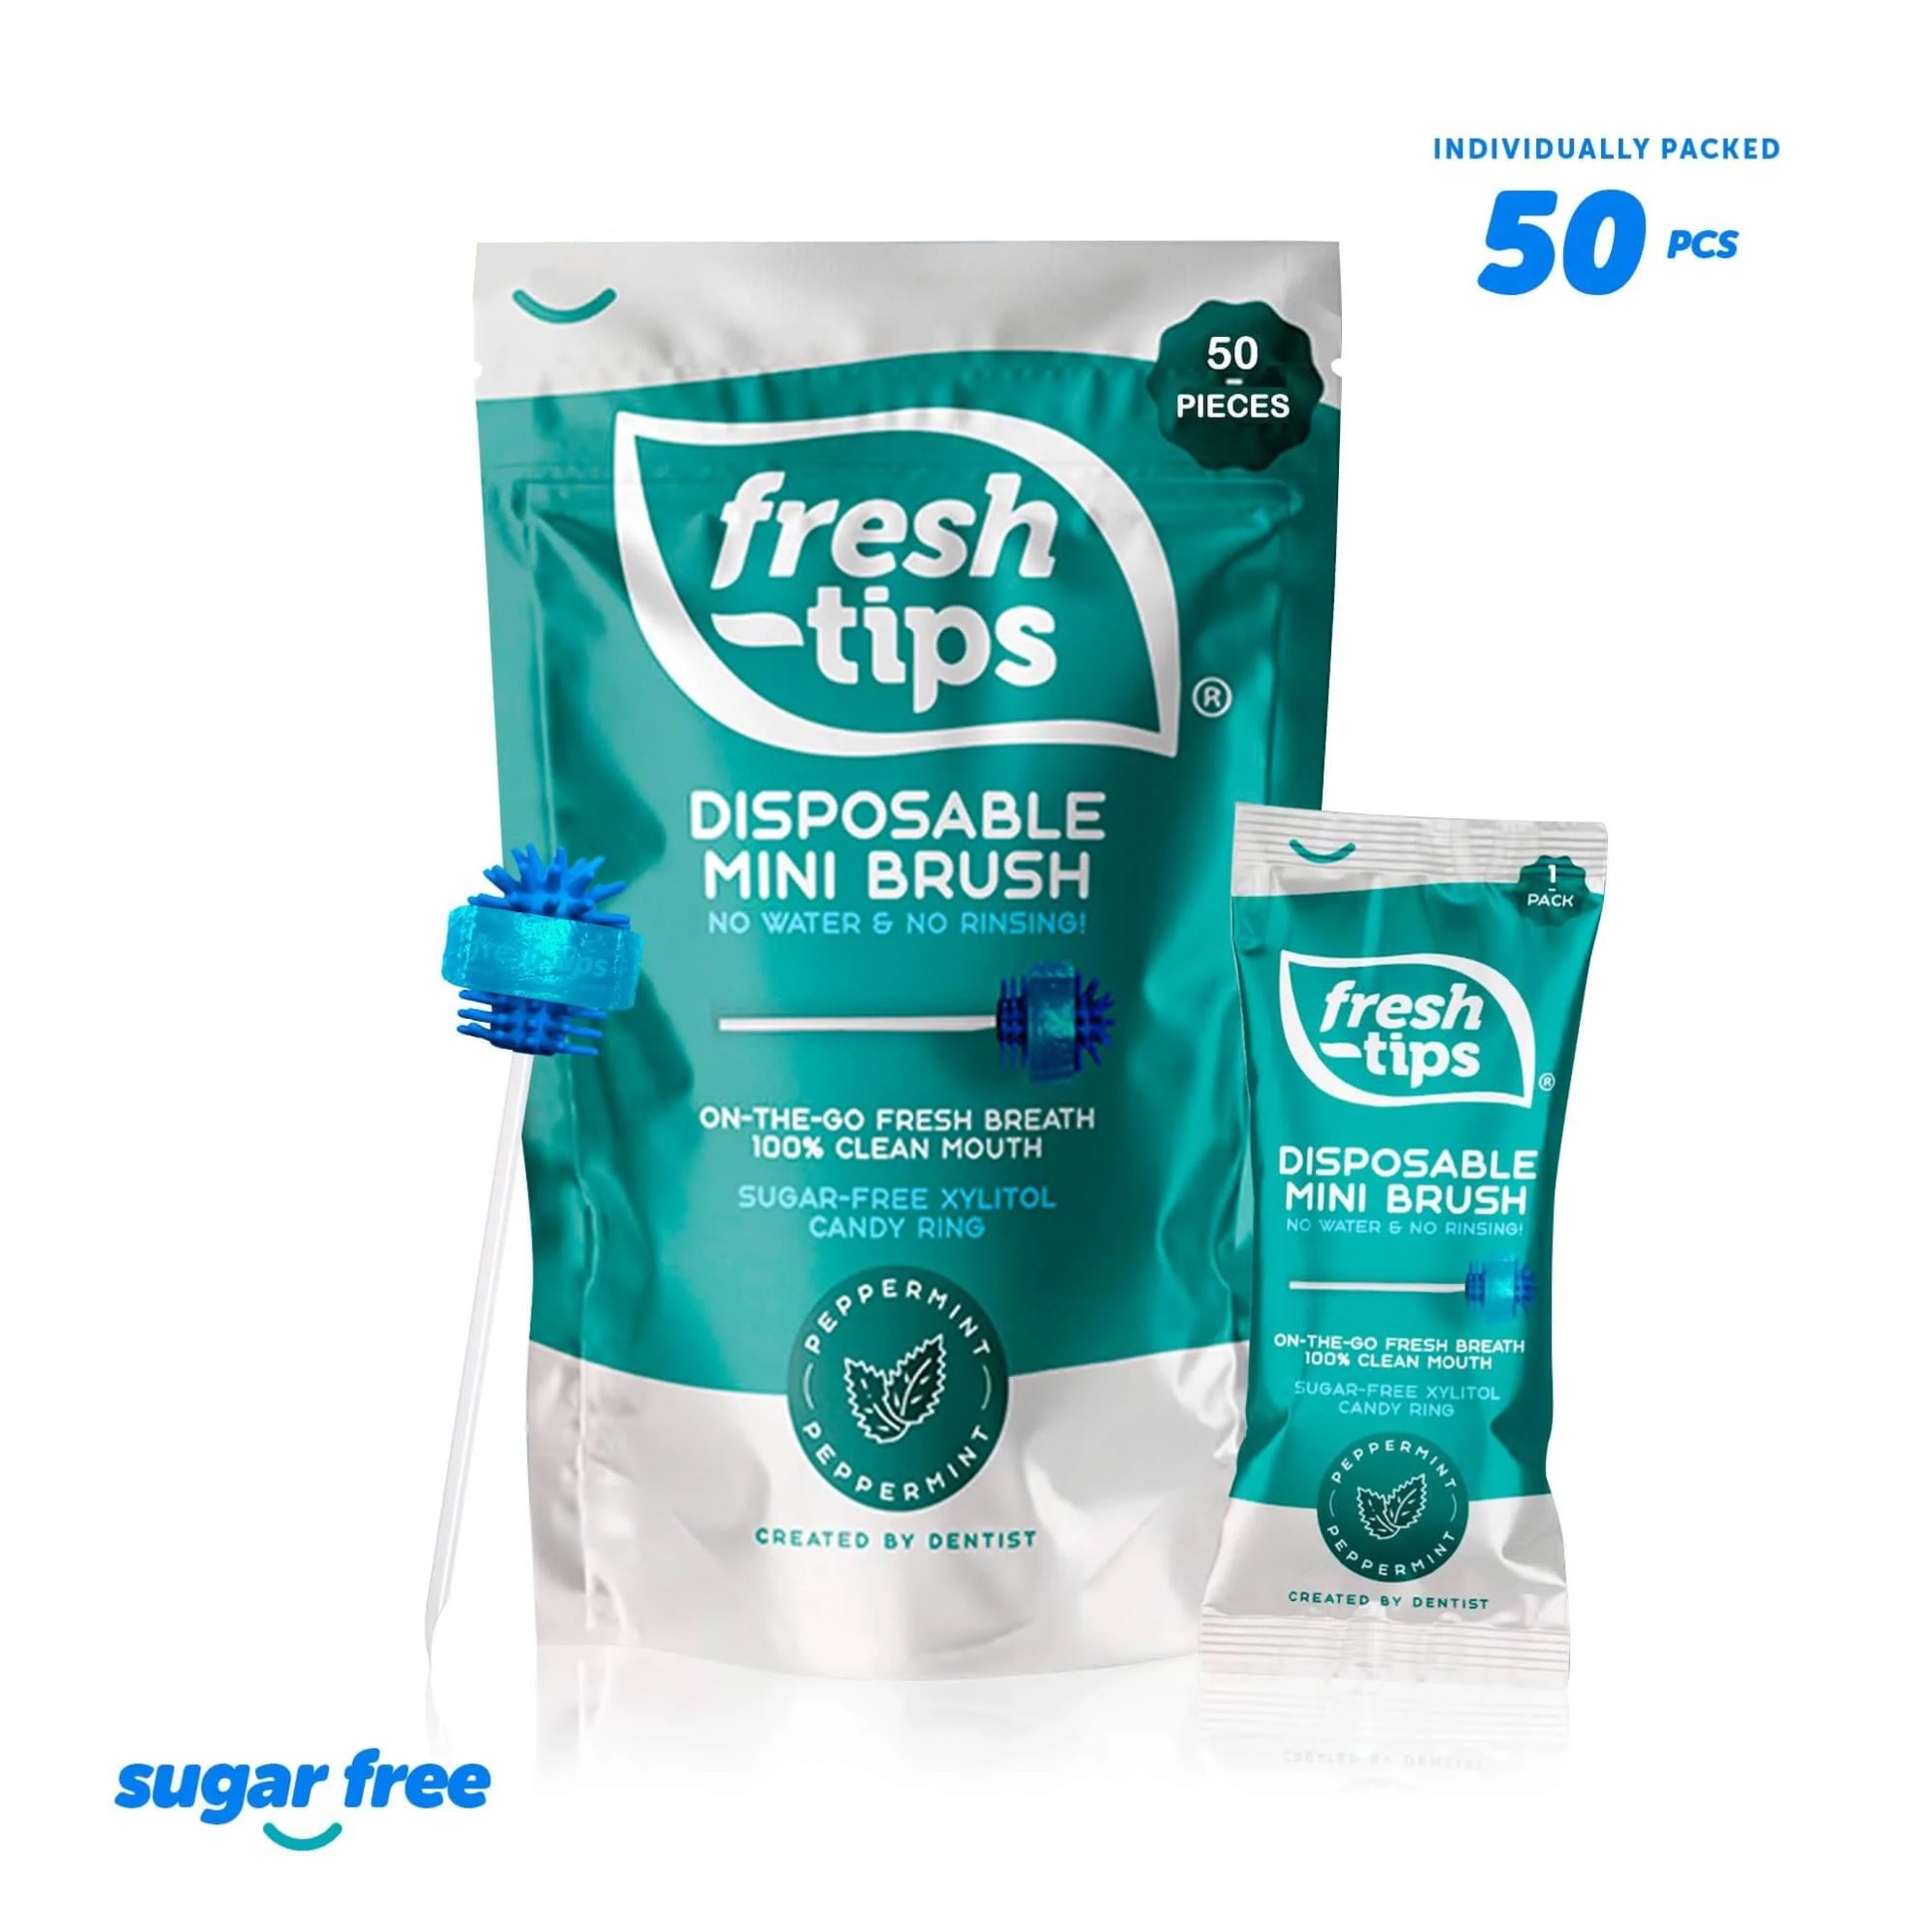 Fresh-Tips - Family Pack (50 Pieces)